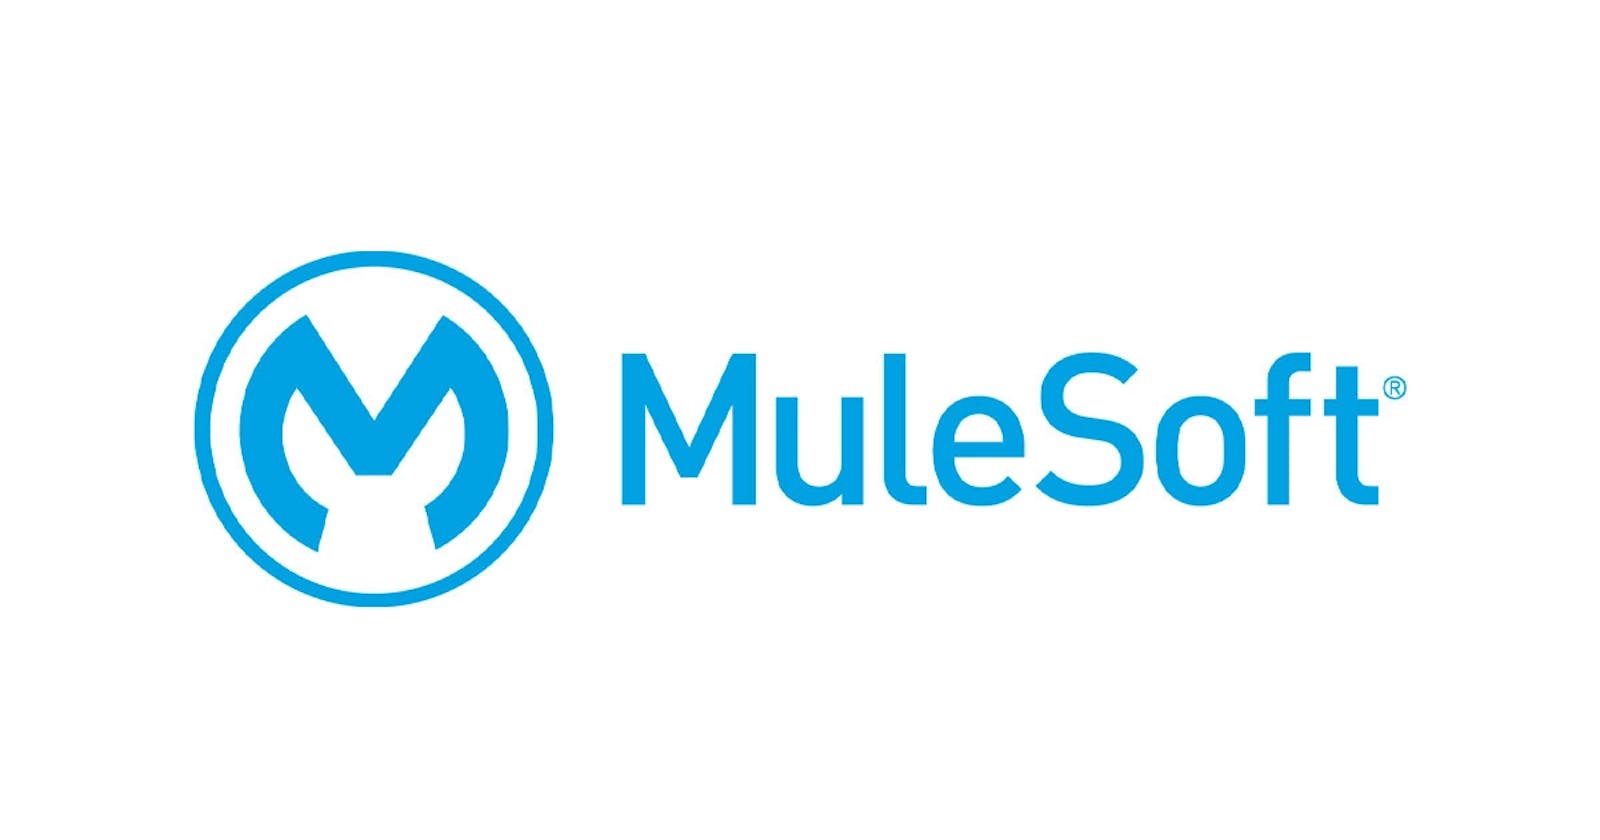 What is MuleSoft & How to Get Started with MuleSoft?